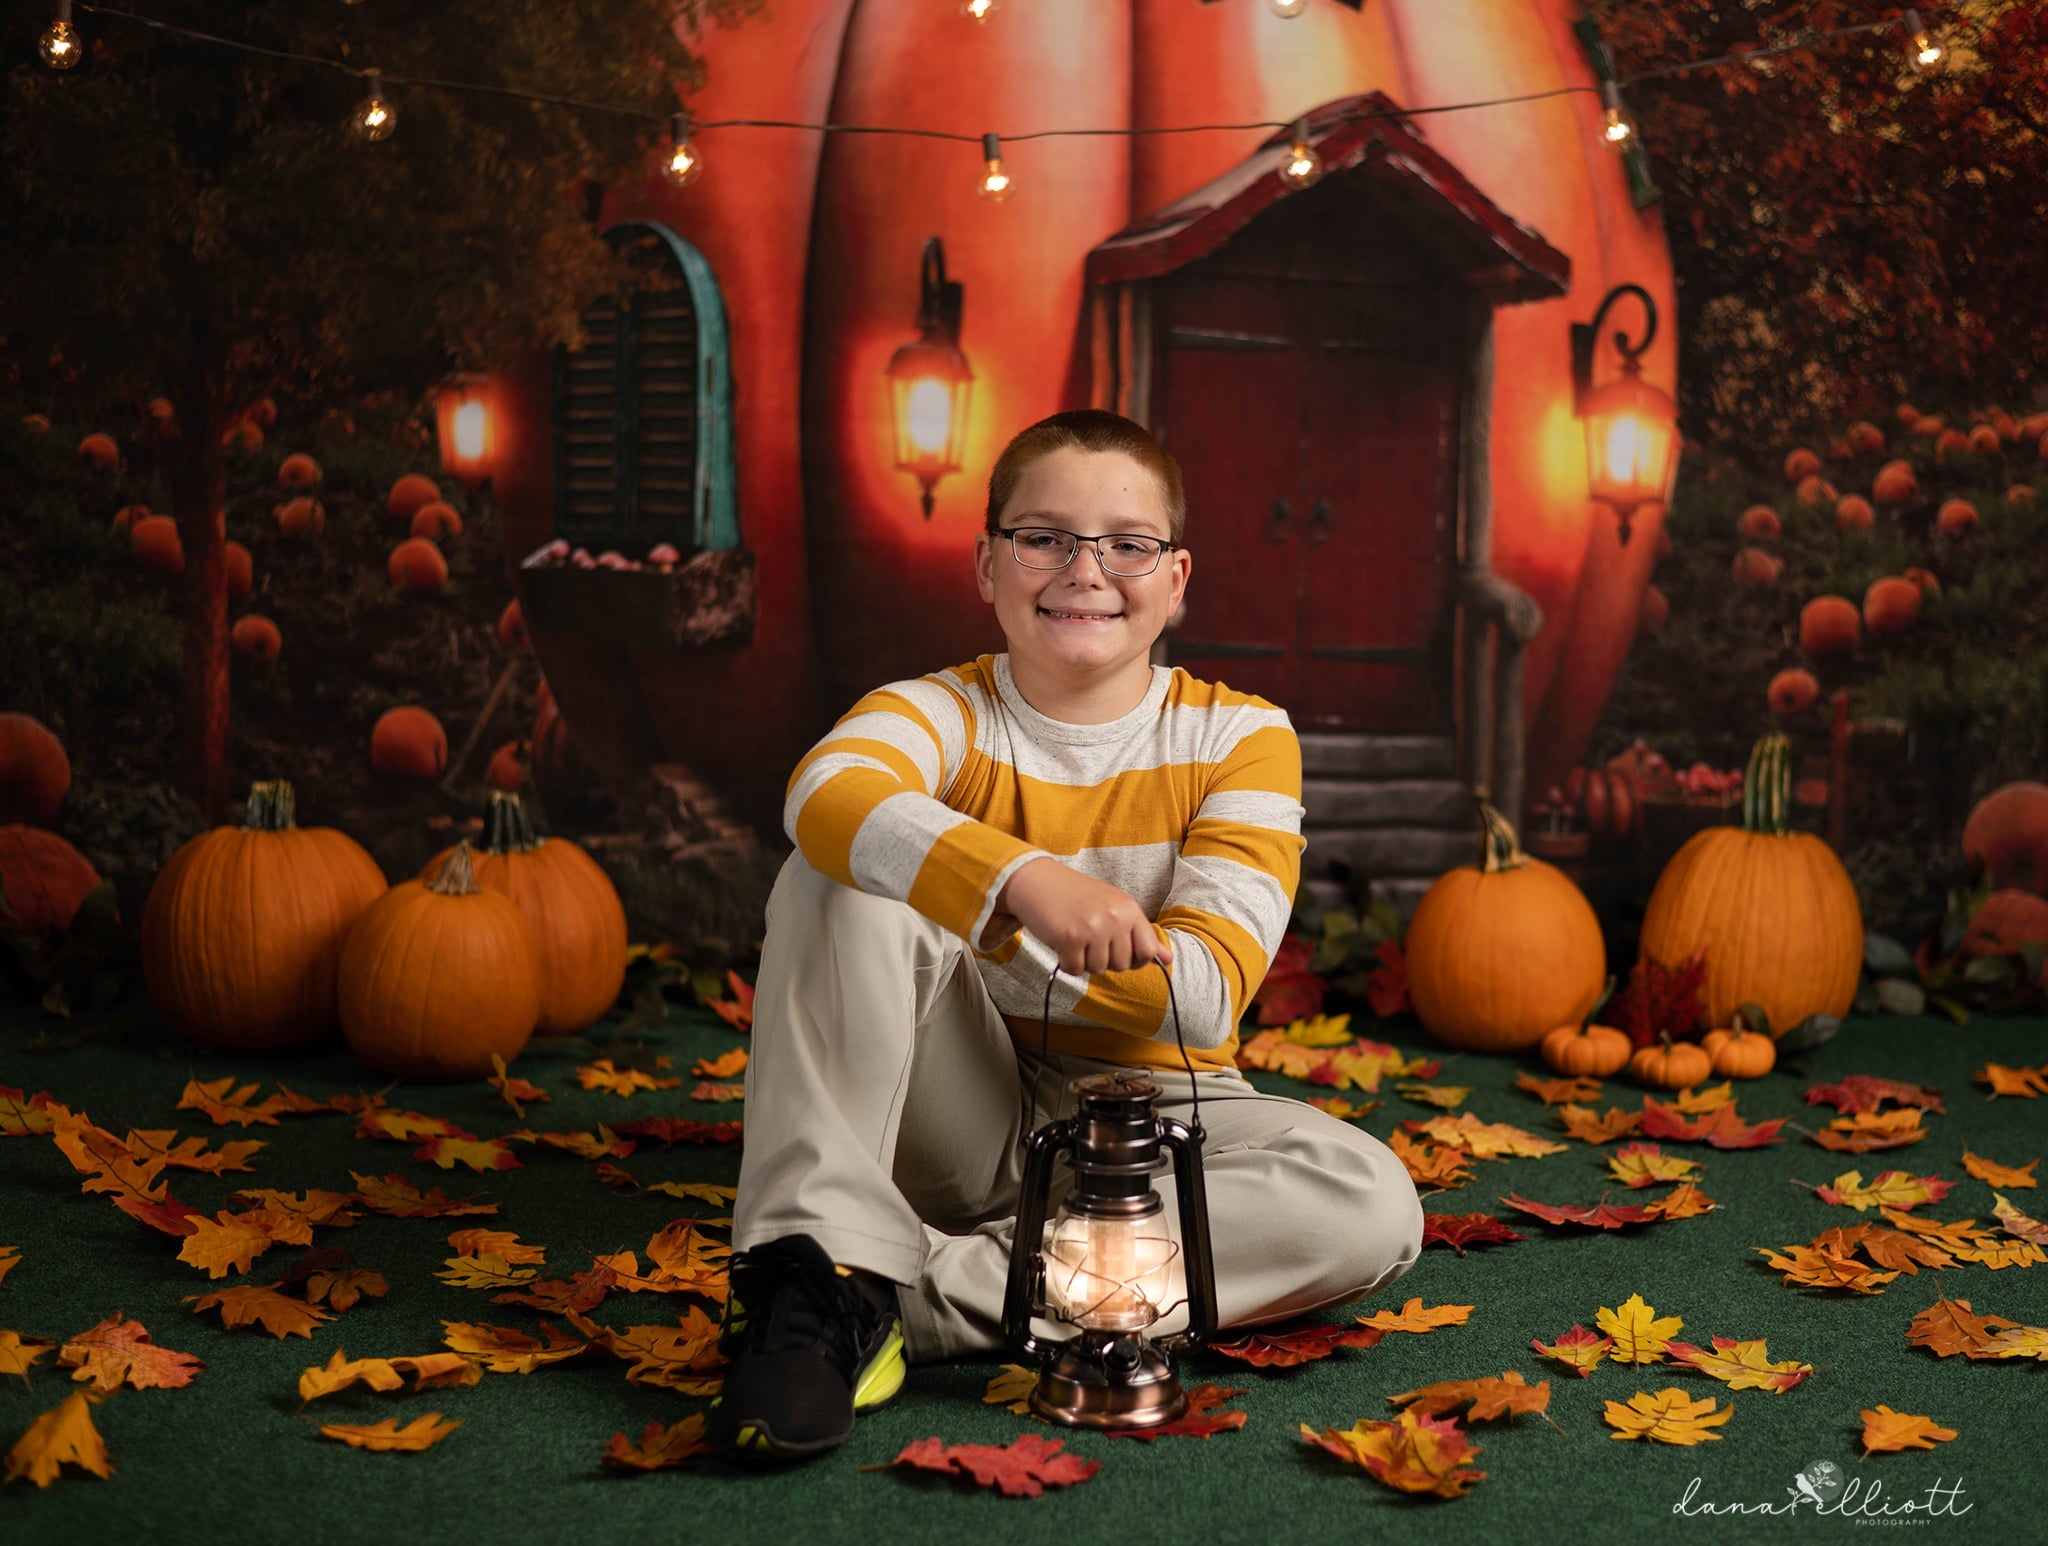 RTS Kate Fall Pumpkin Backdrop Lights for Photography